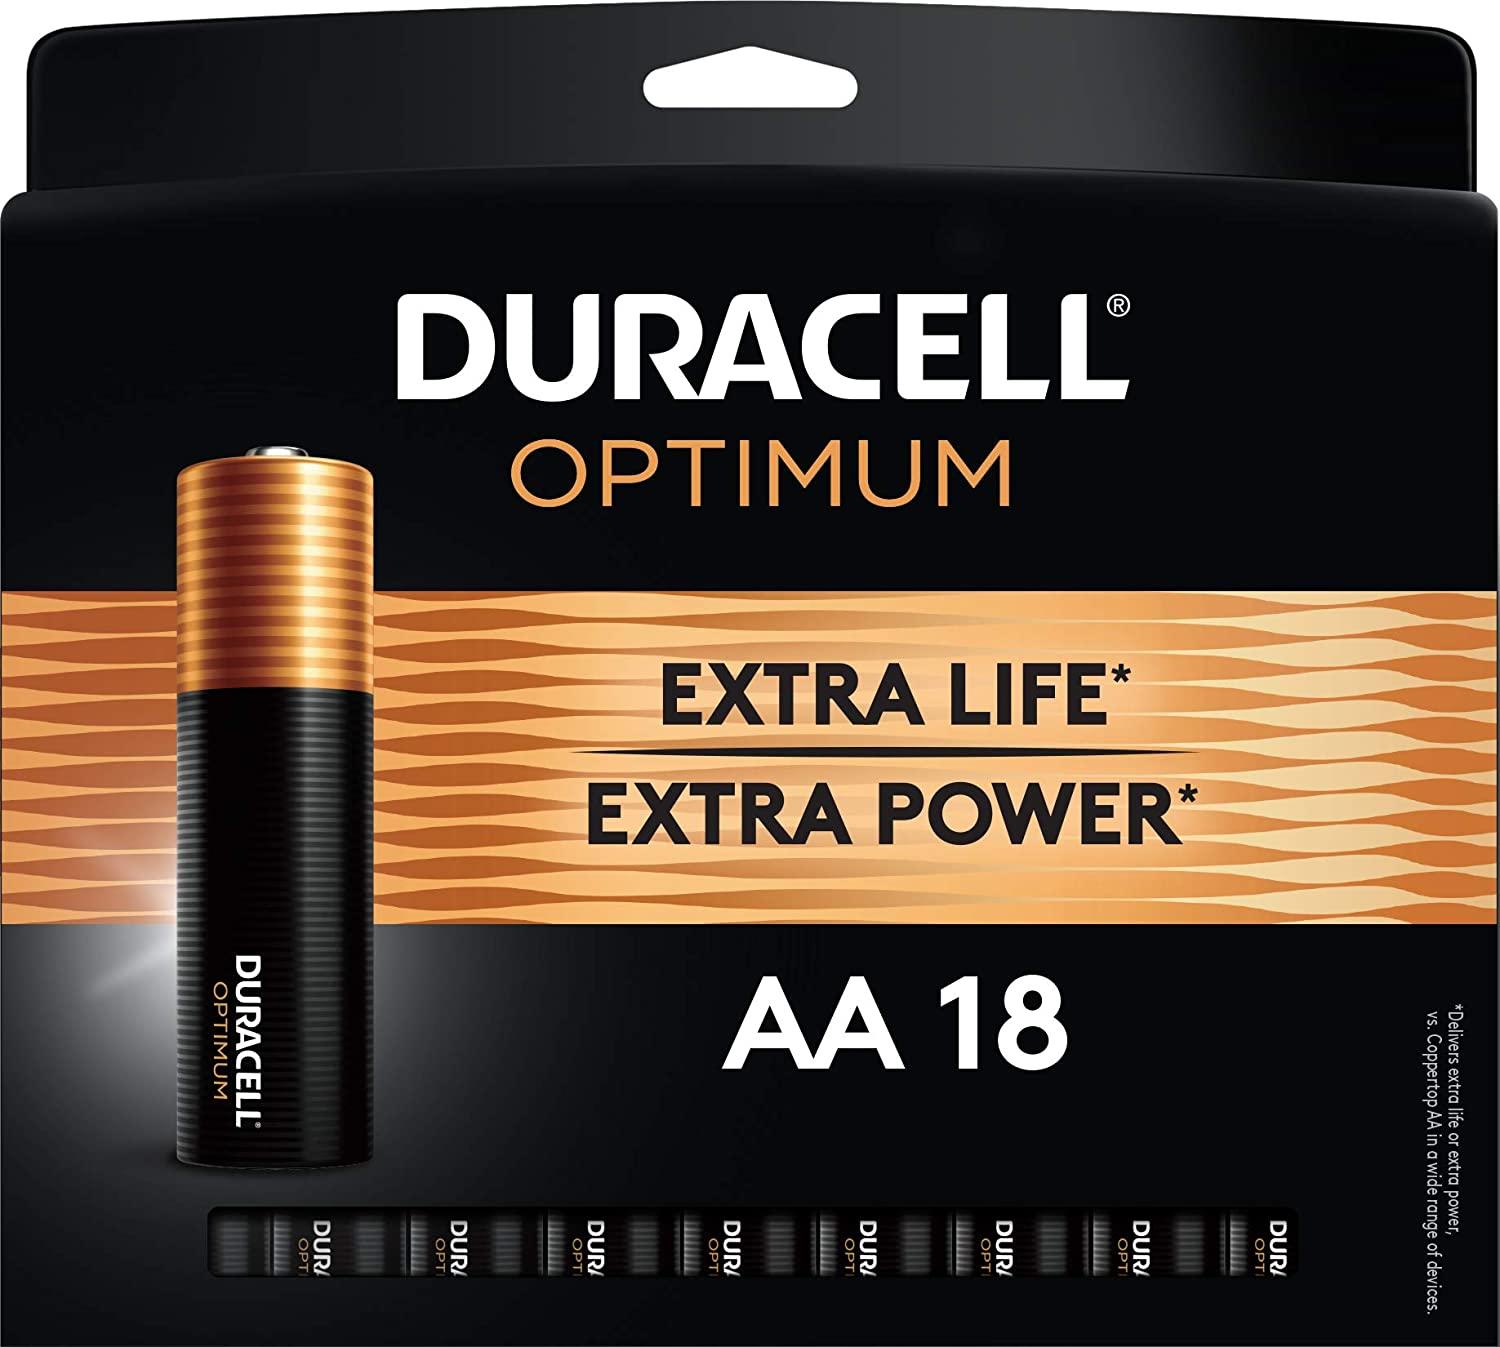 18 Duracell Optimum AA or AAA Batteries for $11.37